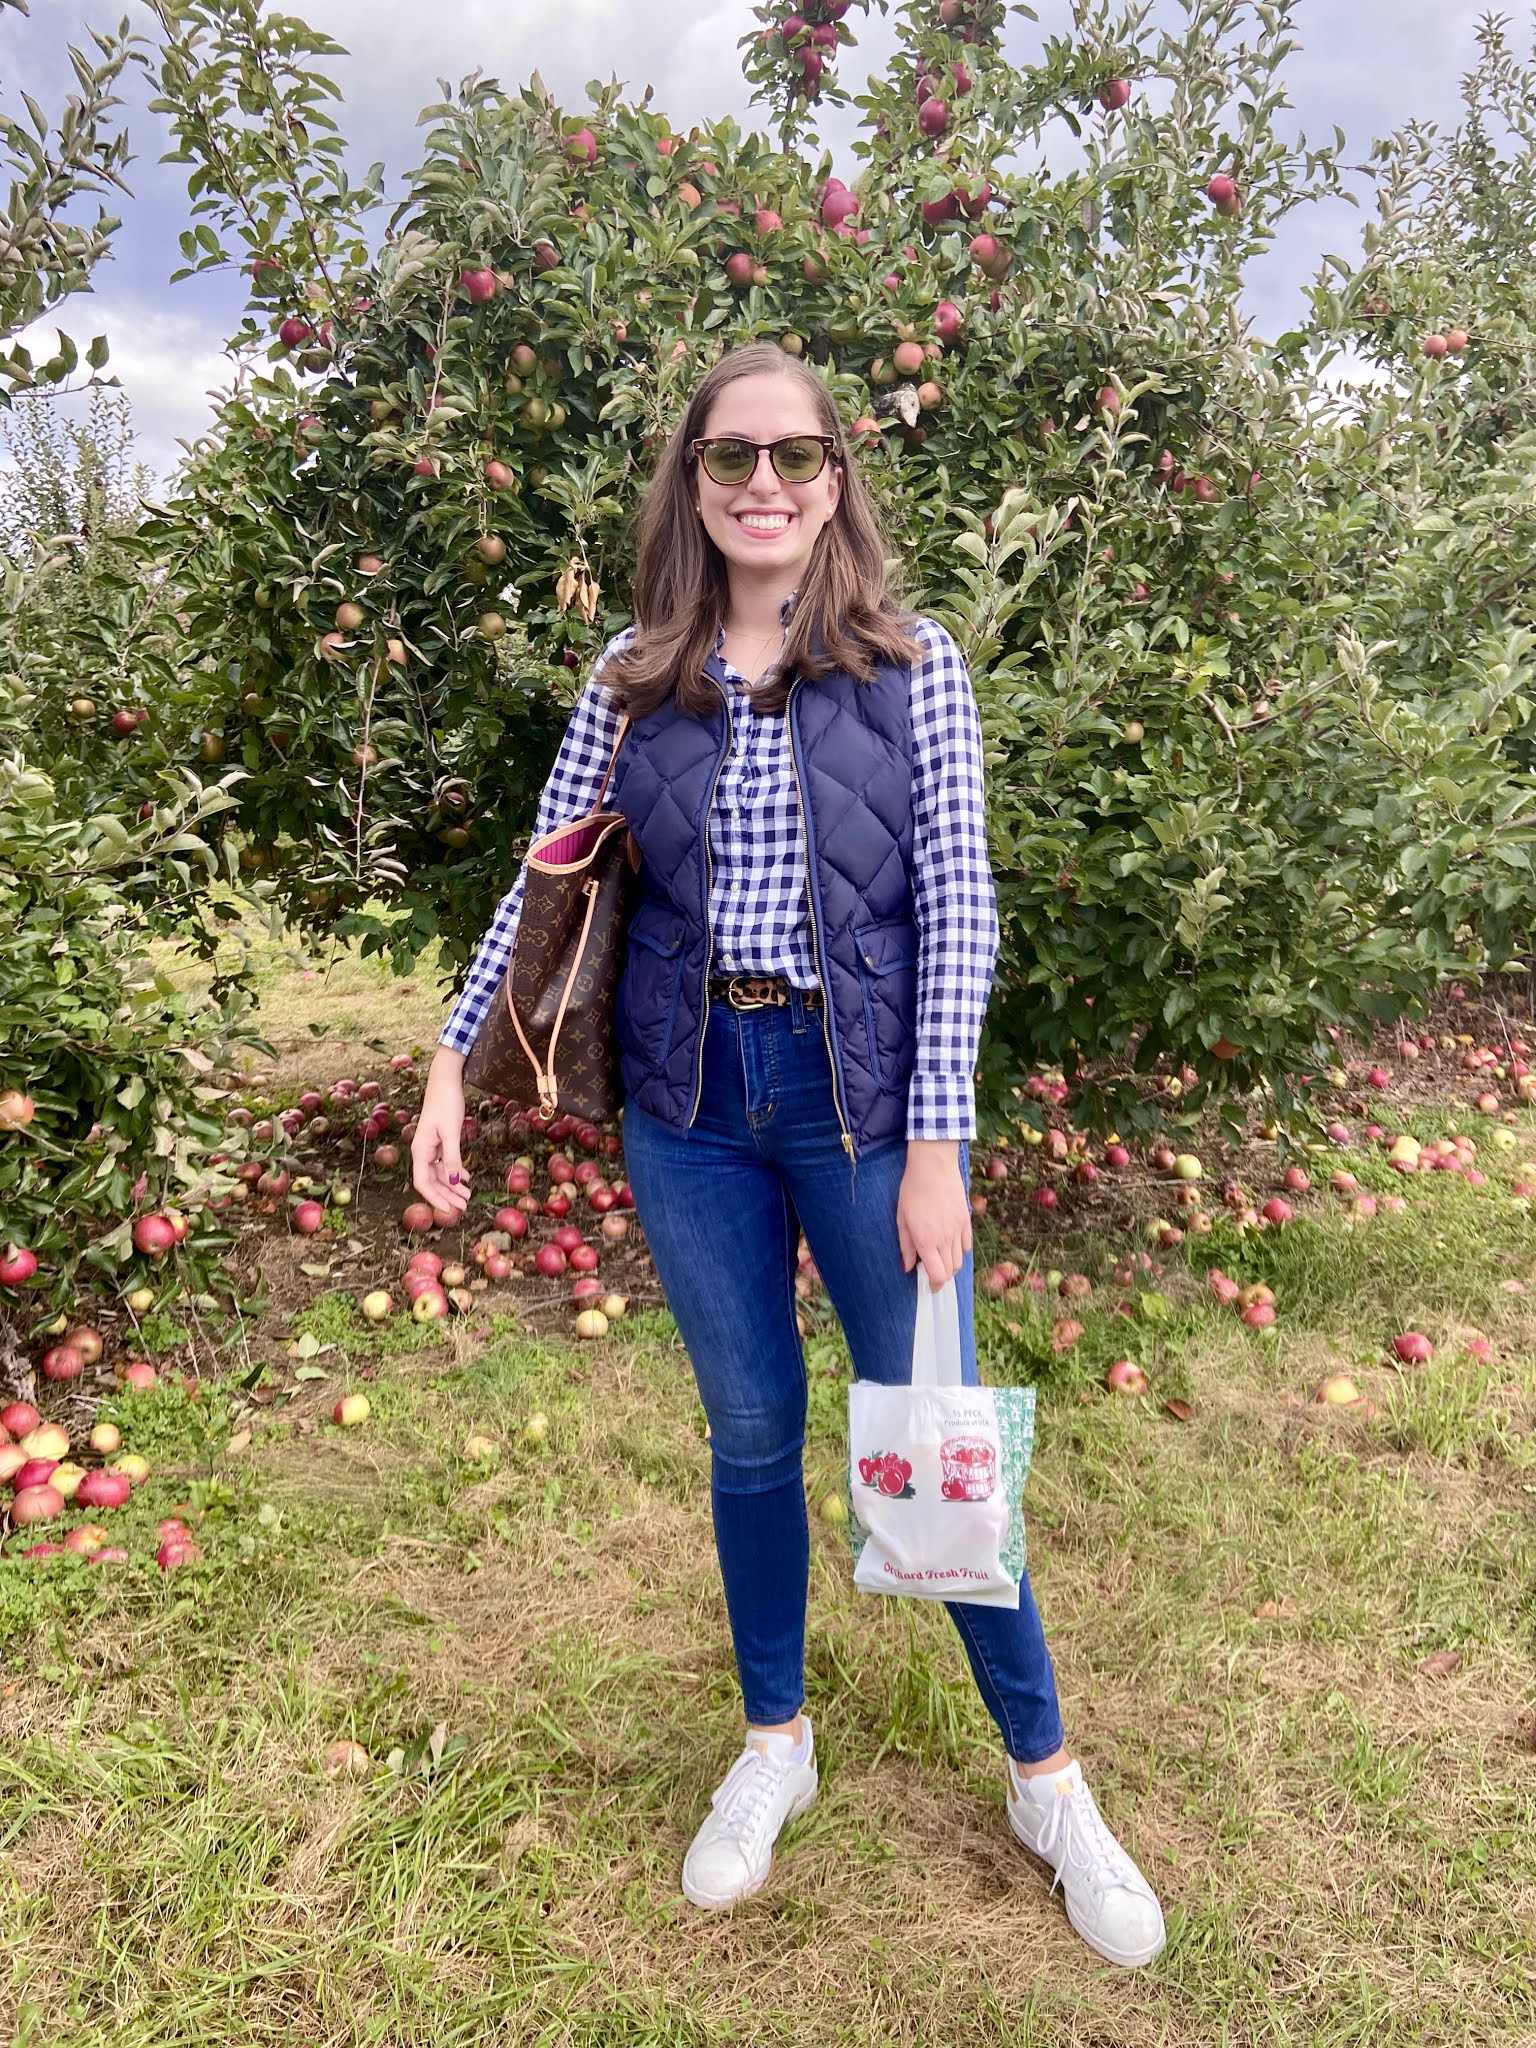 gingham, jeans, white sneakers, puffer vest, apples, Connecticut, apple picking